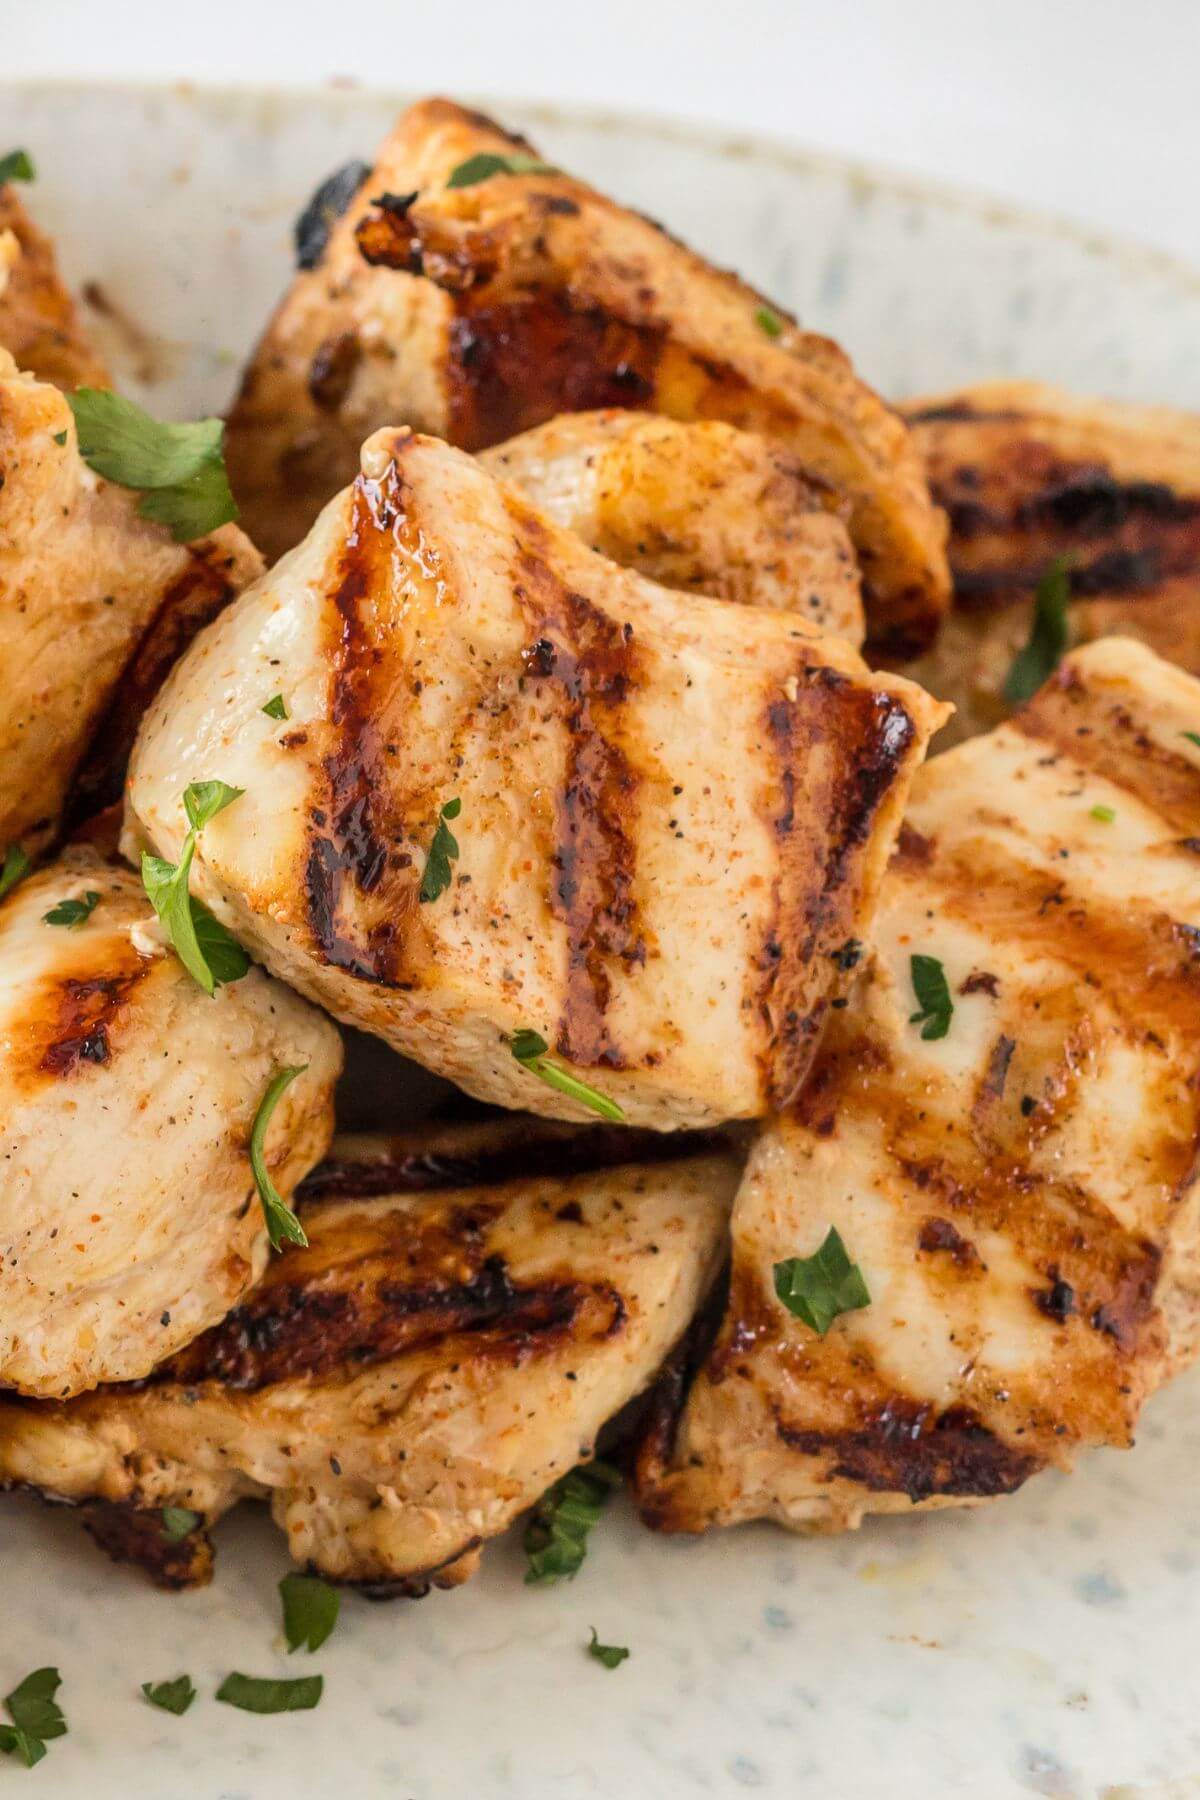 A pile of chicken chunks with grill marks rest on a plate.